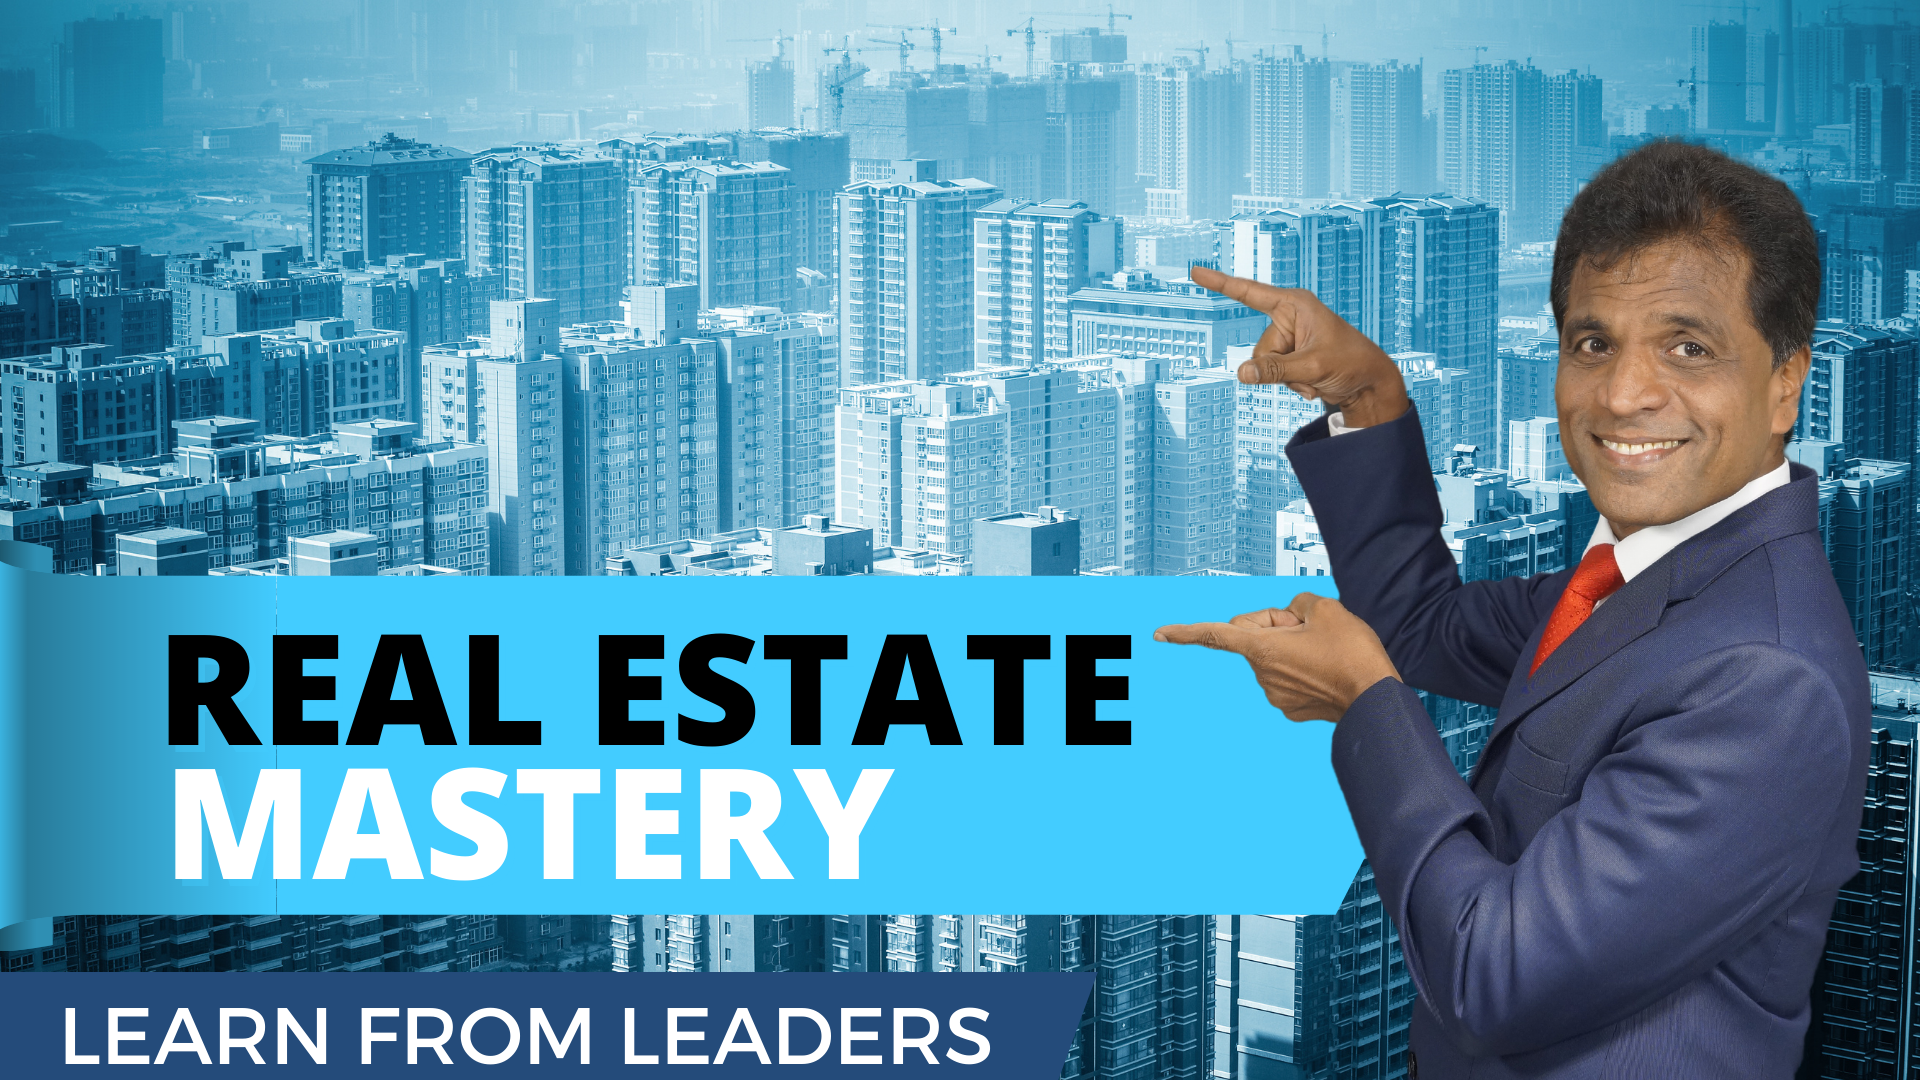 REAL ESTATE INVESTMENT MASTERY COURSE - LATEST WEALTH